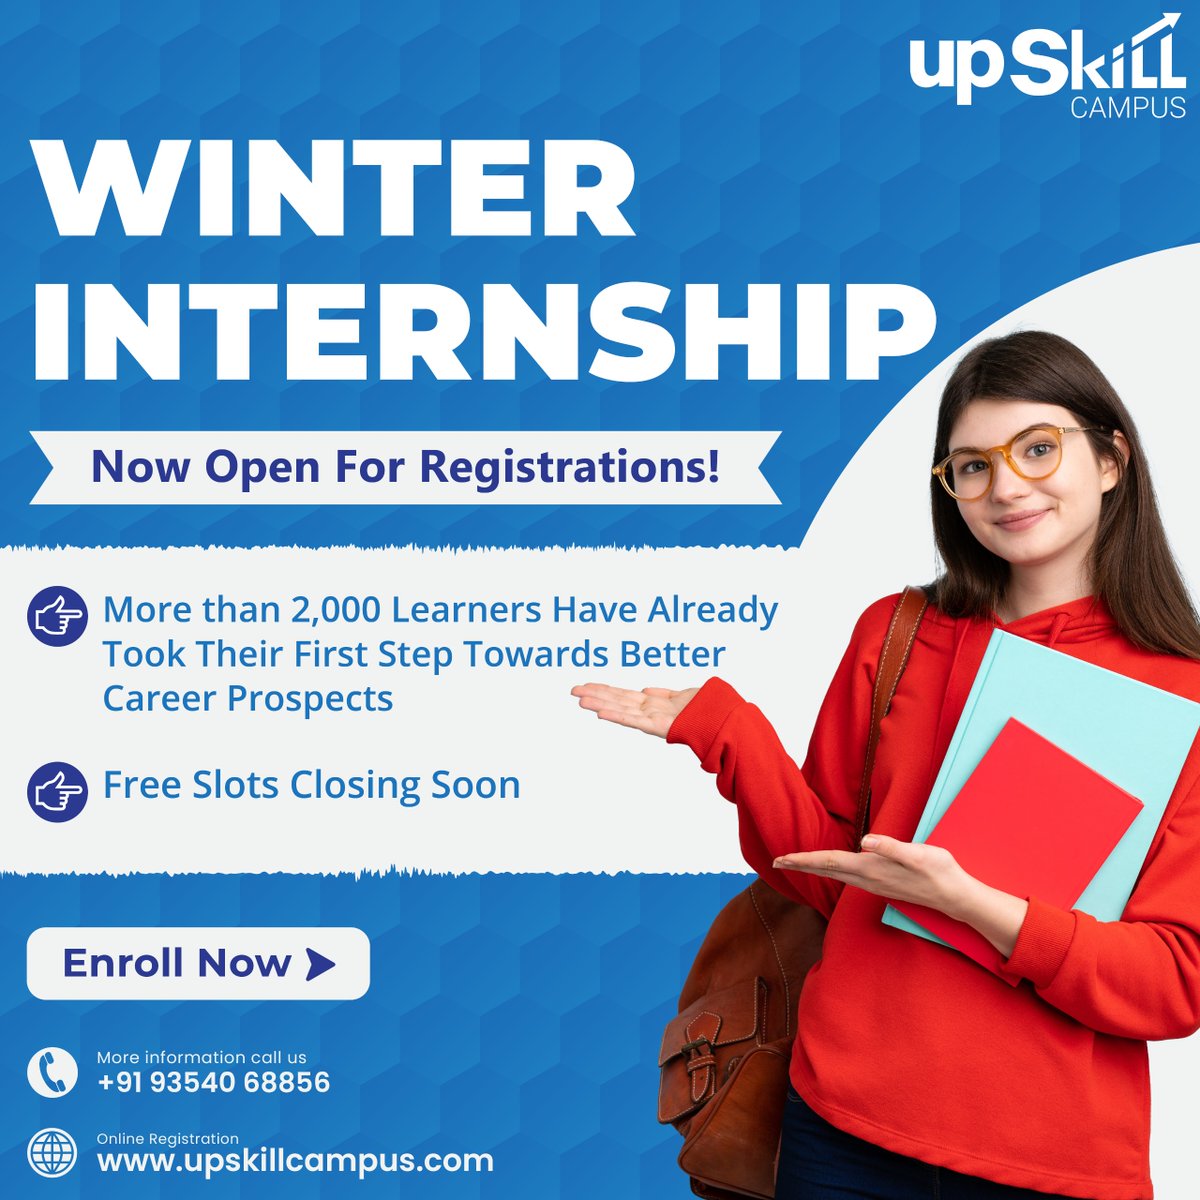 Embrace the Season of Learning! 🌟
.
Winter Internship Registration Now Open with Upskill Campus. Elevate your skills, seize new opportunities, and make this winter a season of professional growth. ❄️🚀

#TheIoTAcademy #edtech #education #upskillcampus #edtech #LearnAndGrow